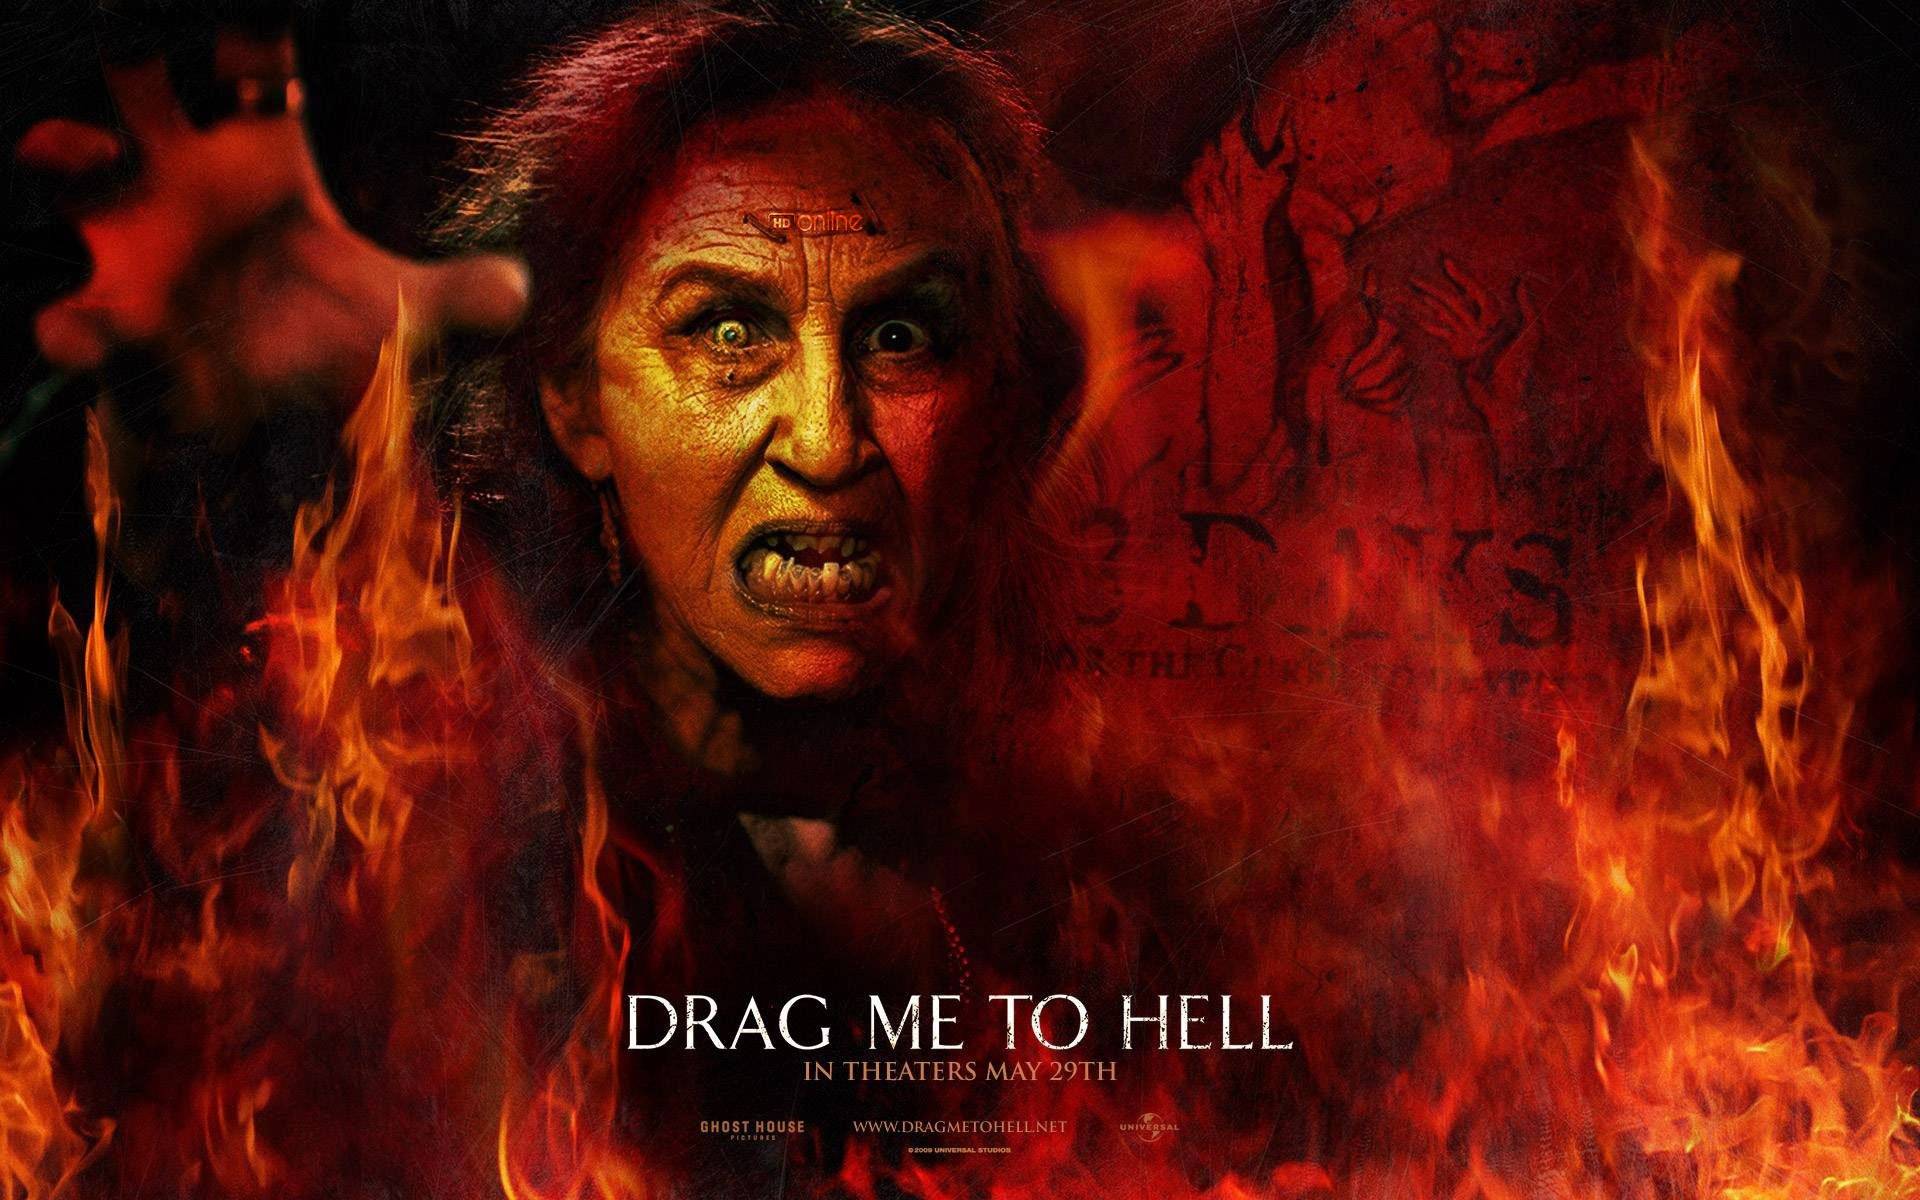 Drag Me to Hell / Drag Me to Hell (2009)